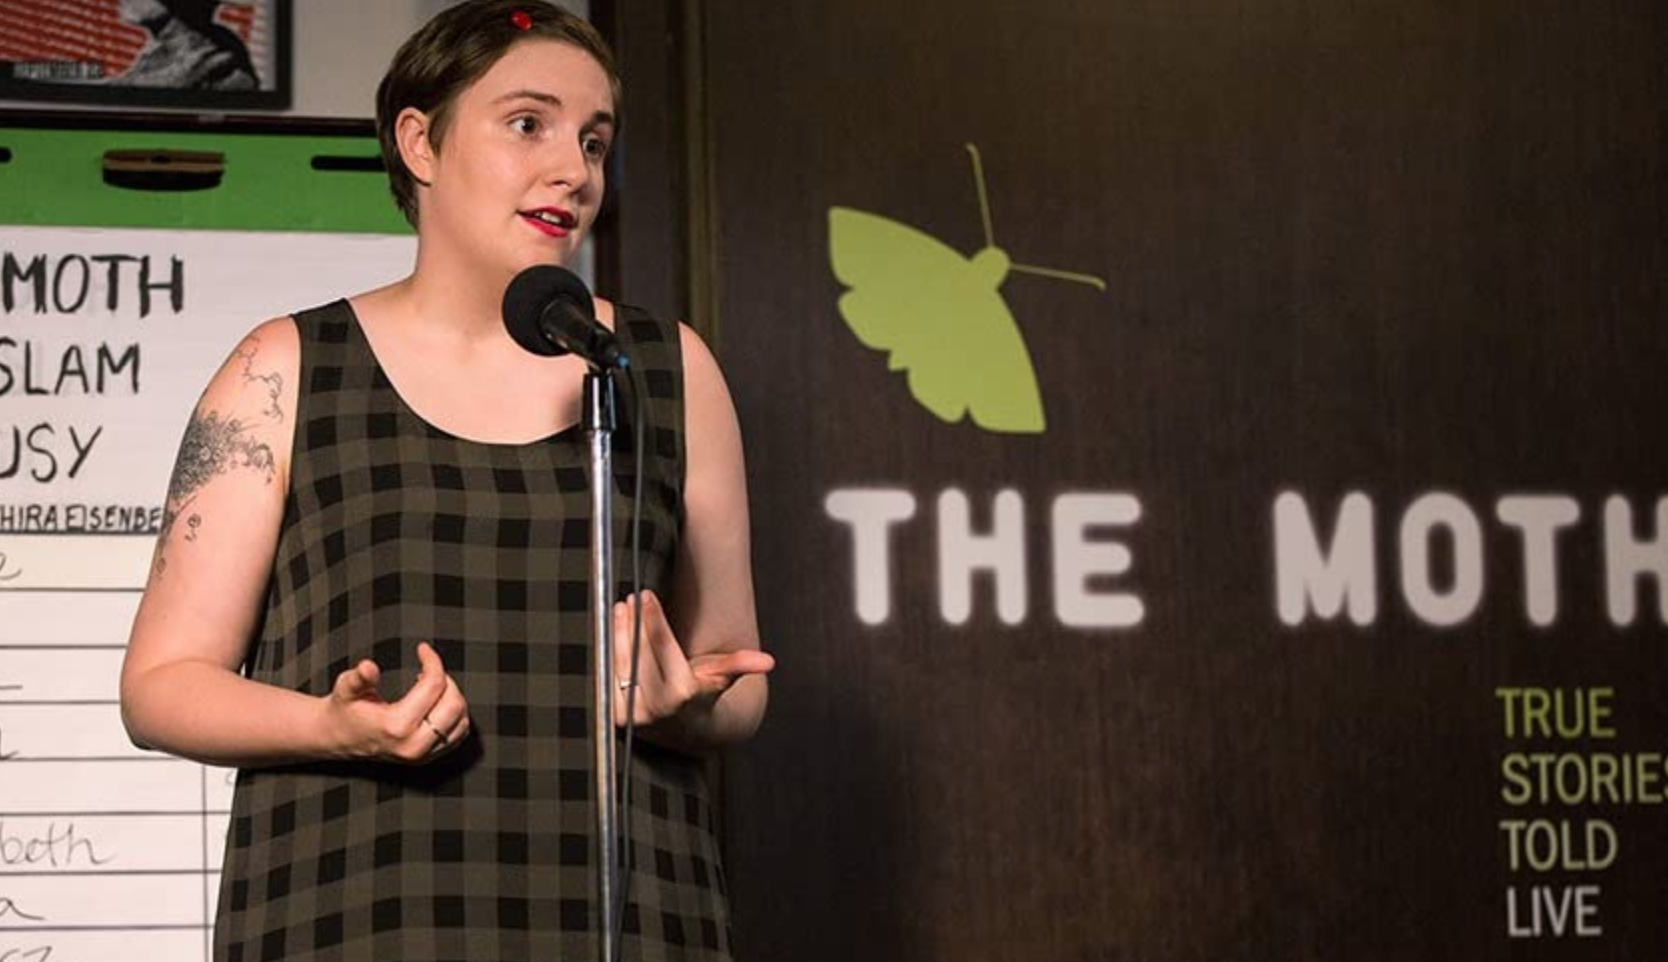 Hannah (Lena Dunham) in the middle of a poetry reading in this image from Apatow Productions